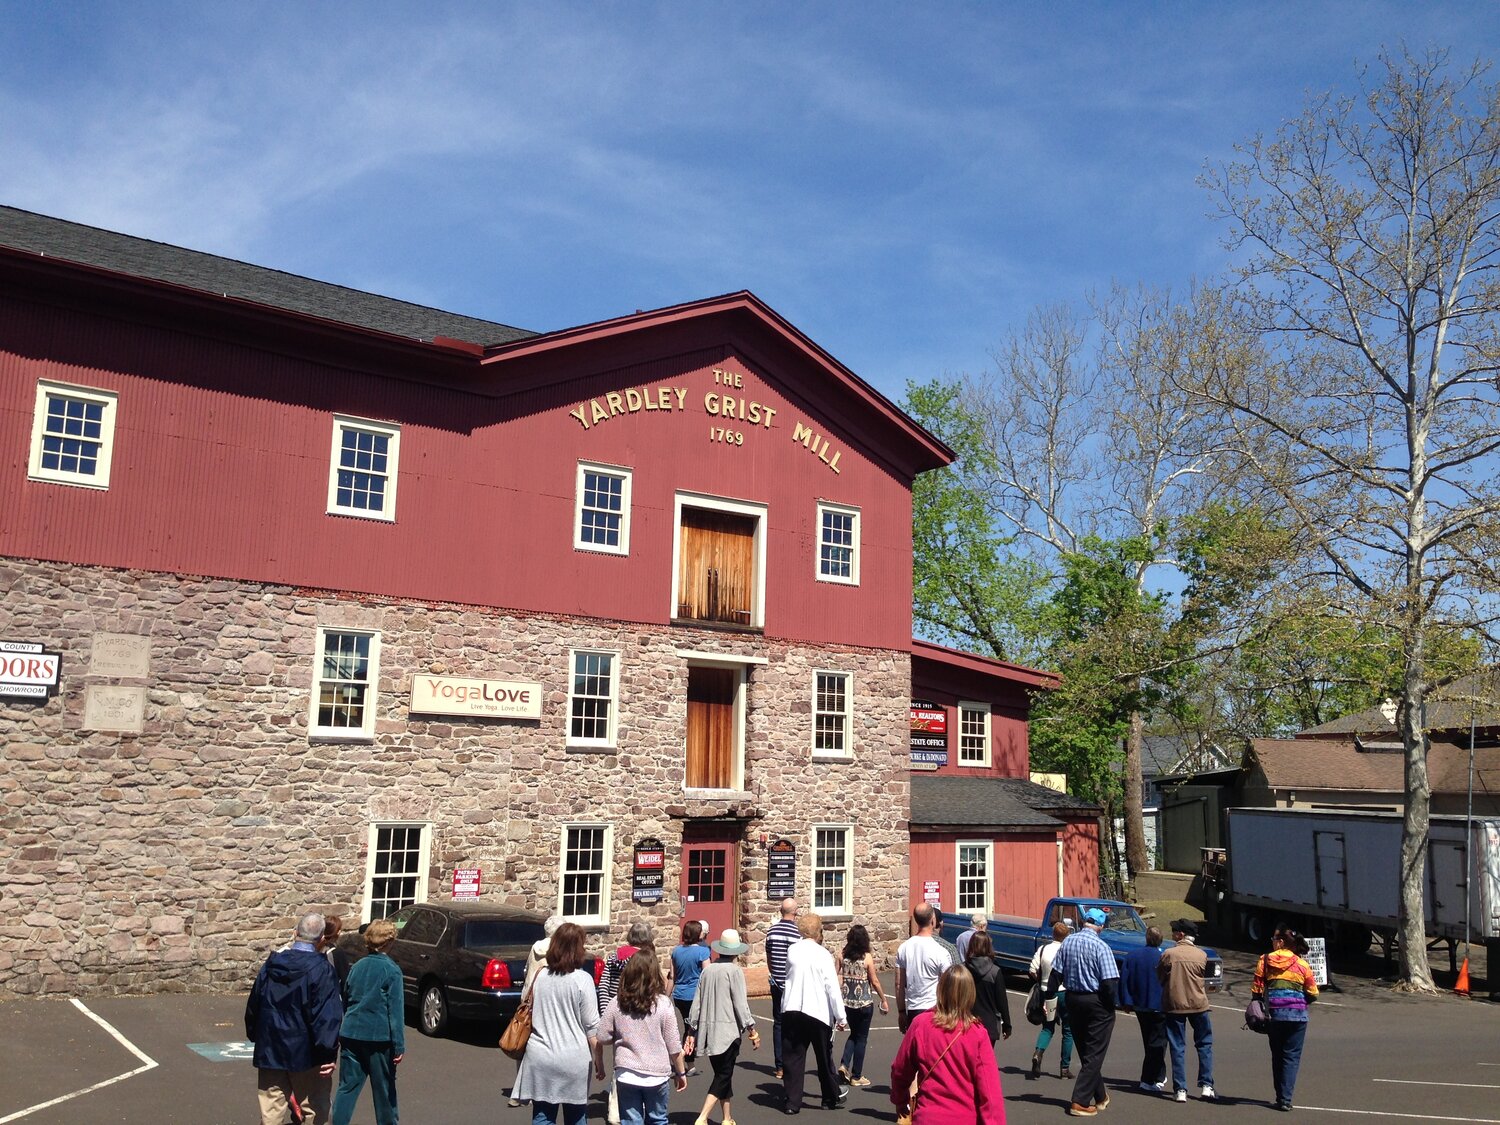 A Yardley walking tour passes by the old Yardley Grist Mill in 2016.